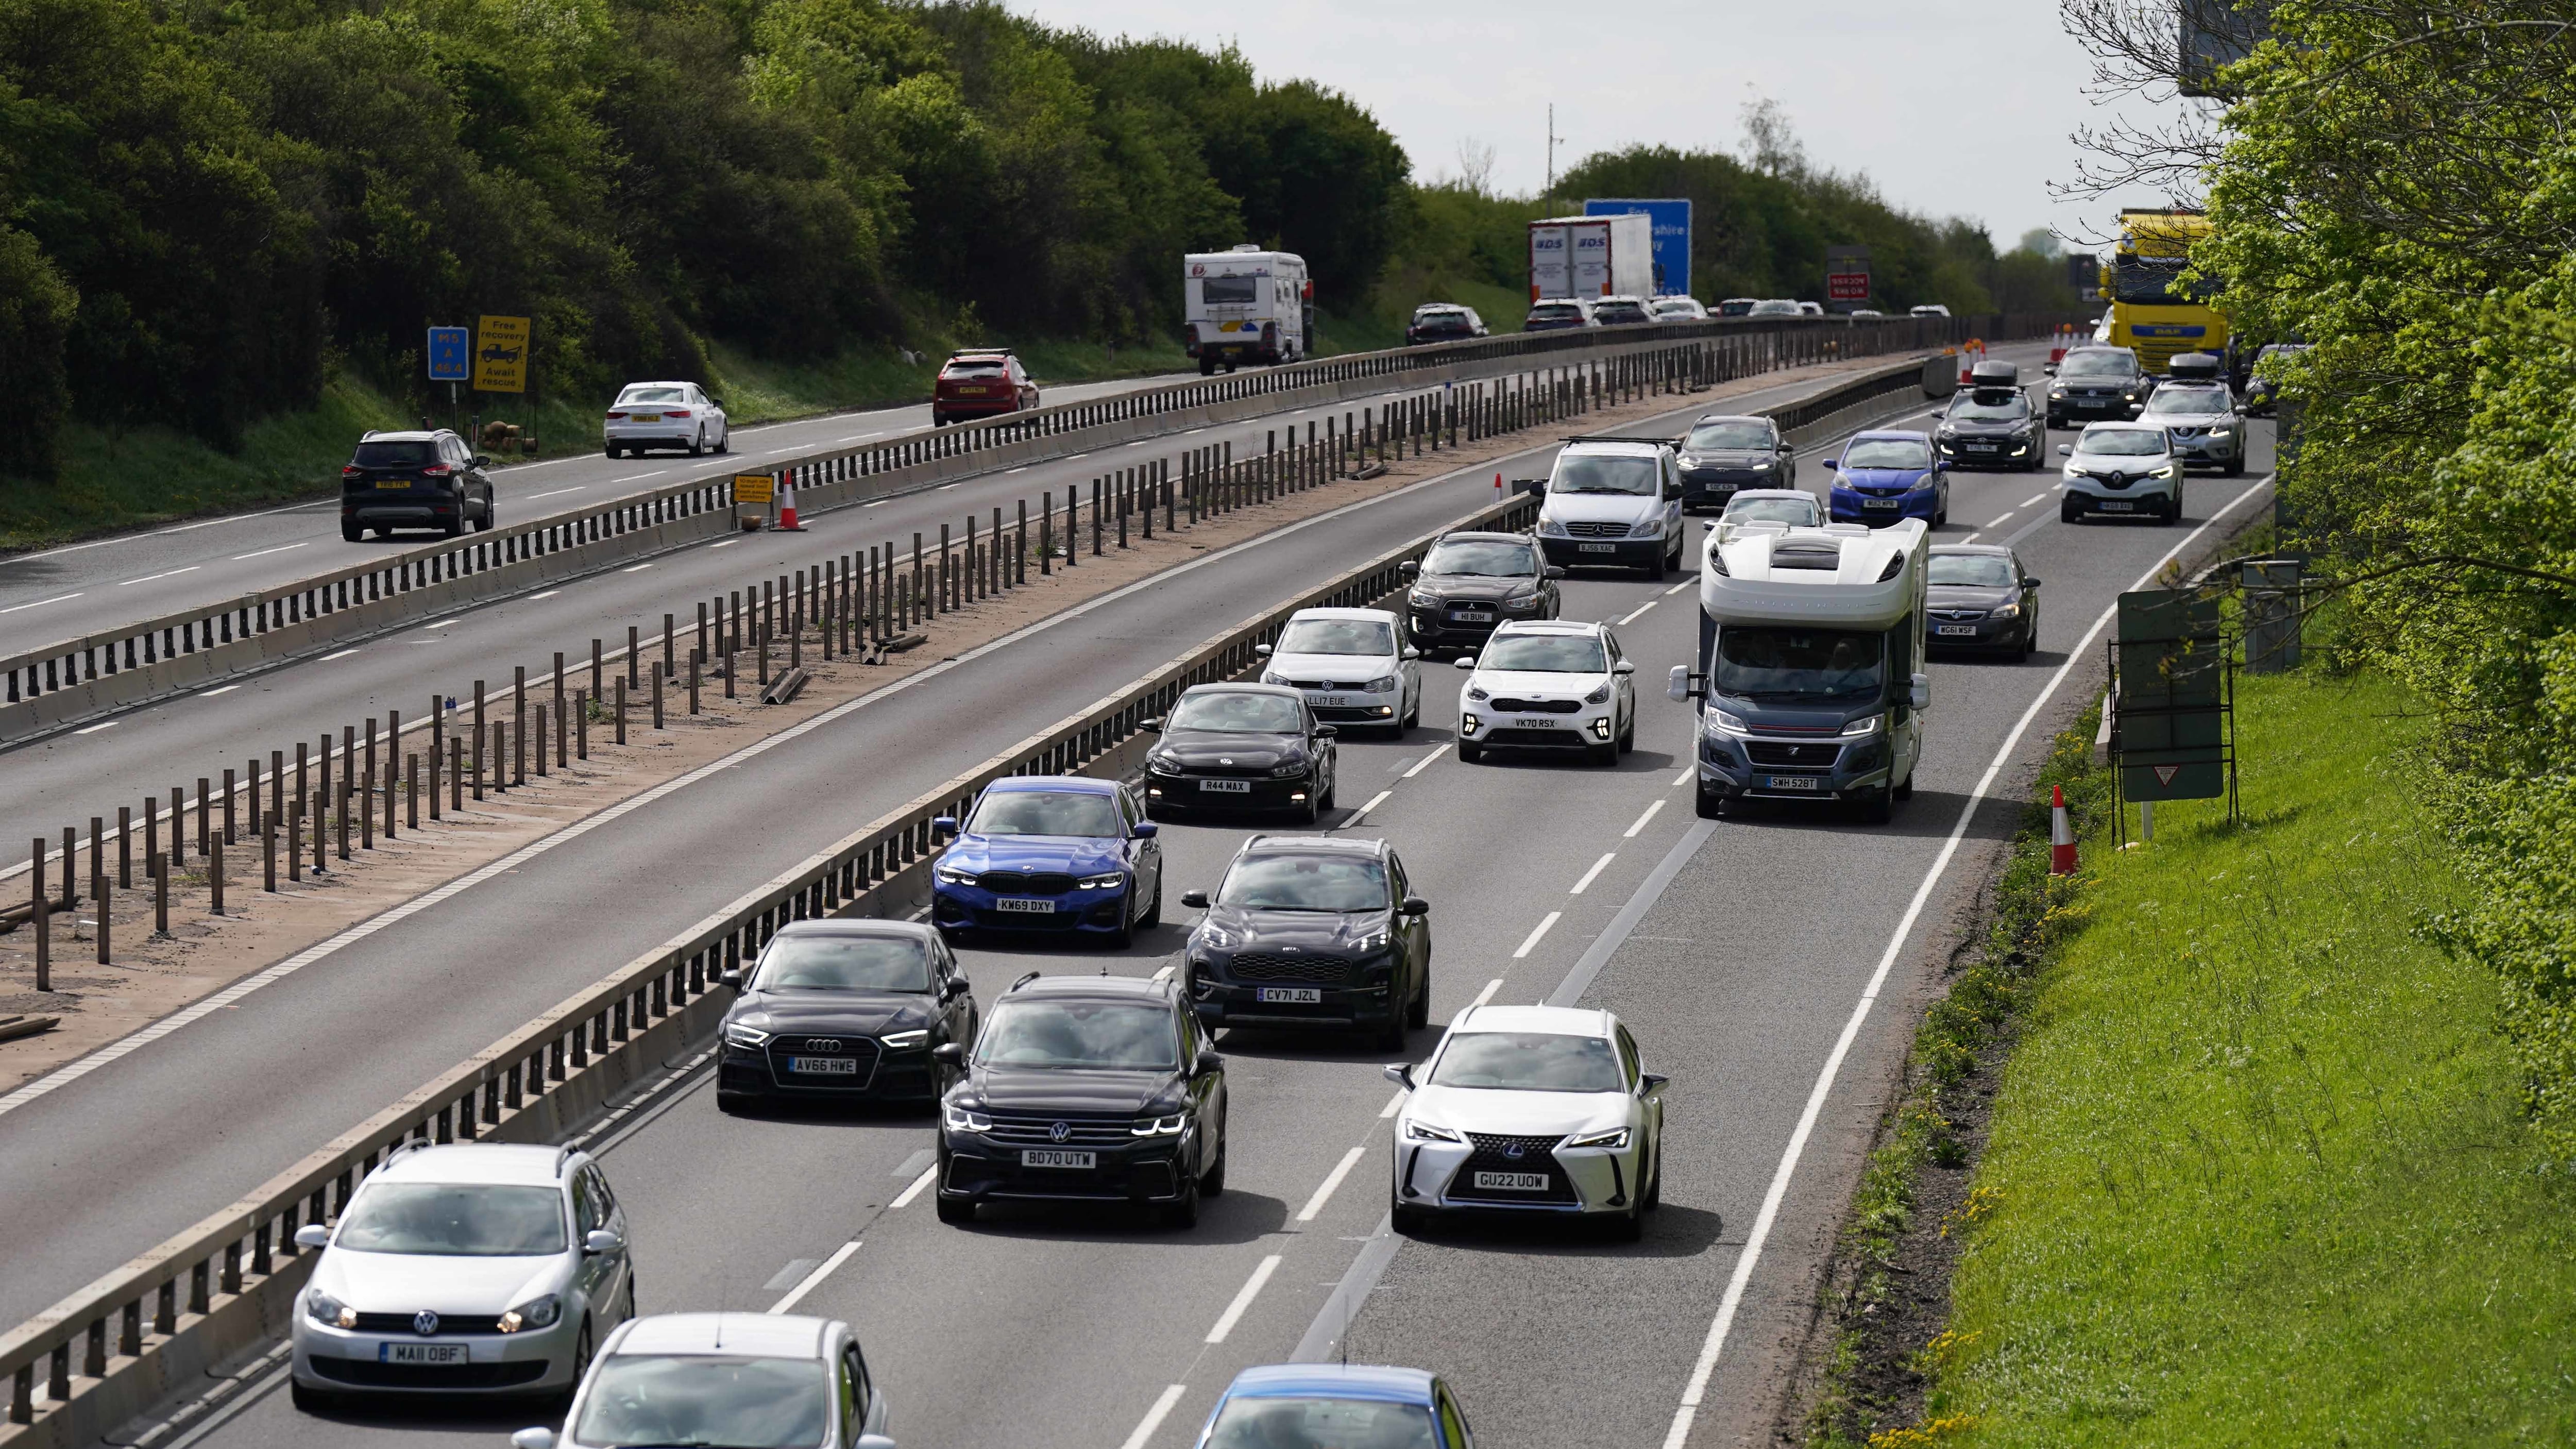 Drivers suffered a 12% annual rise in delays on England’s motorways and major A roads, new figures show